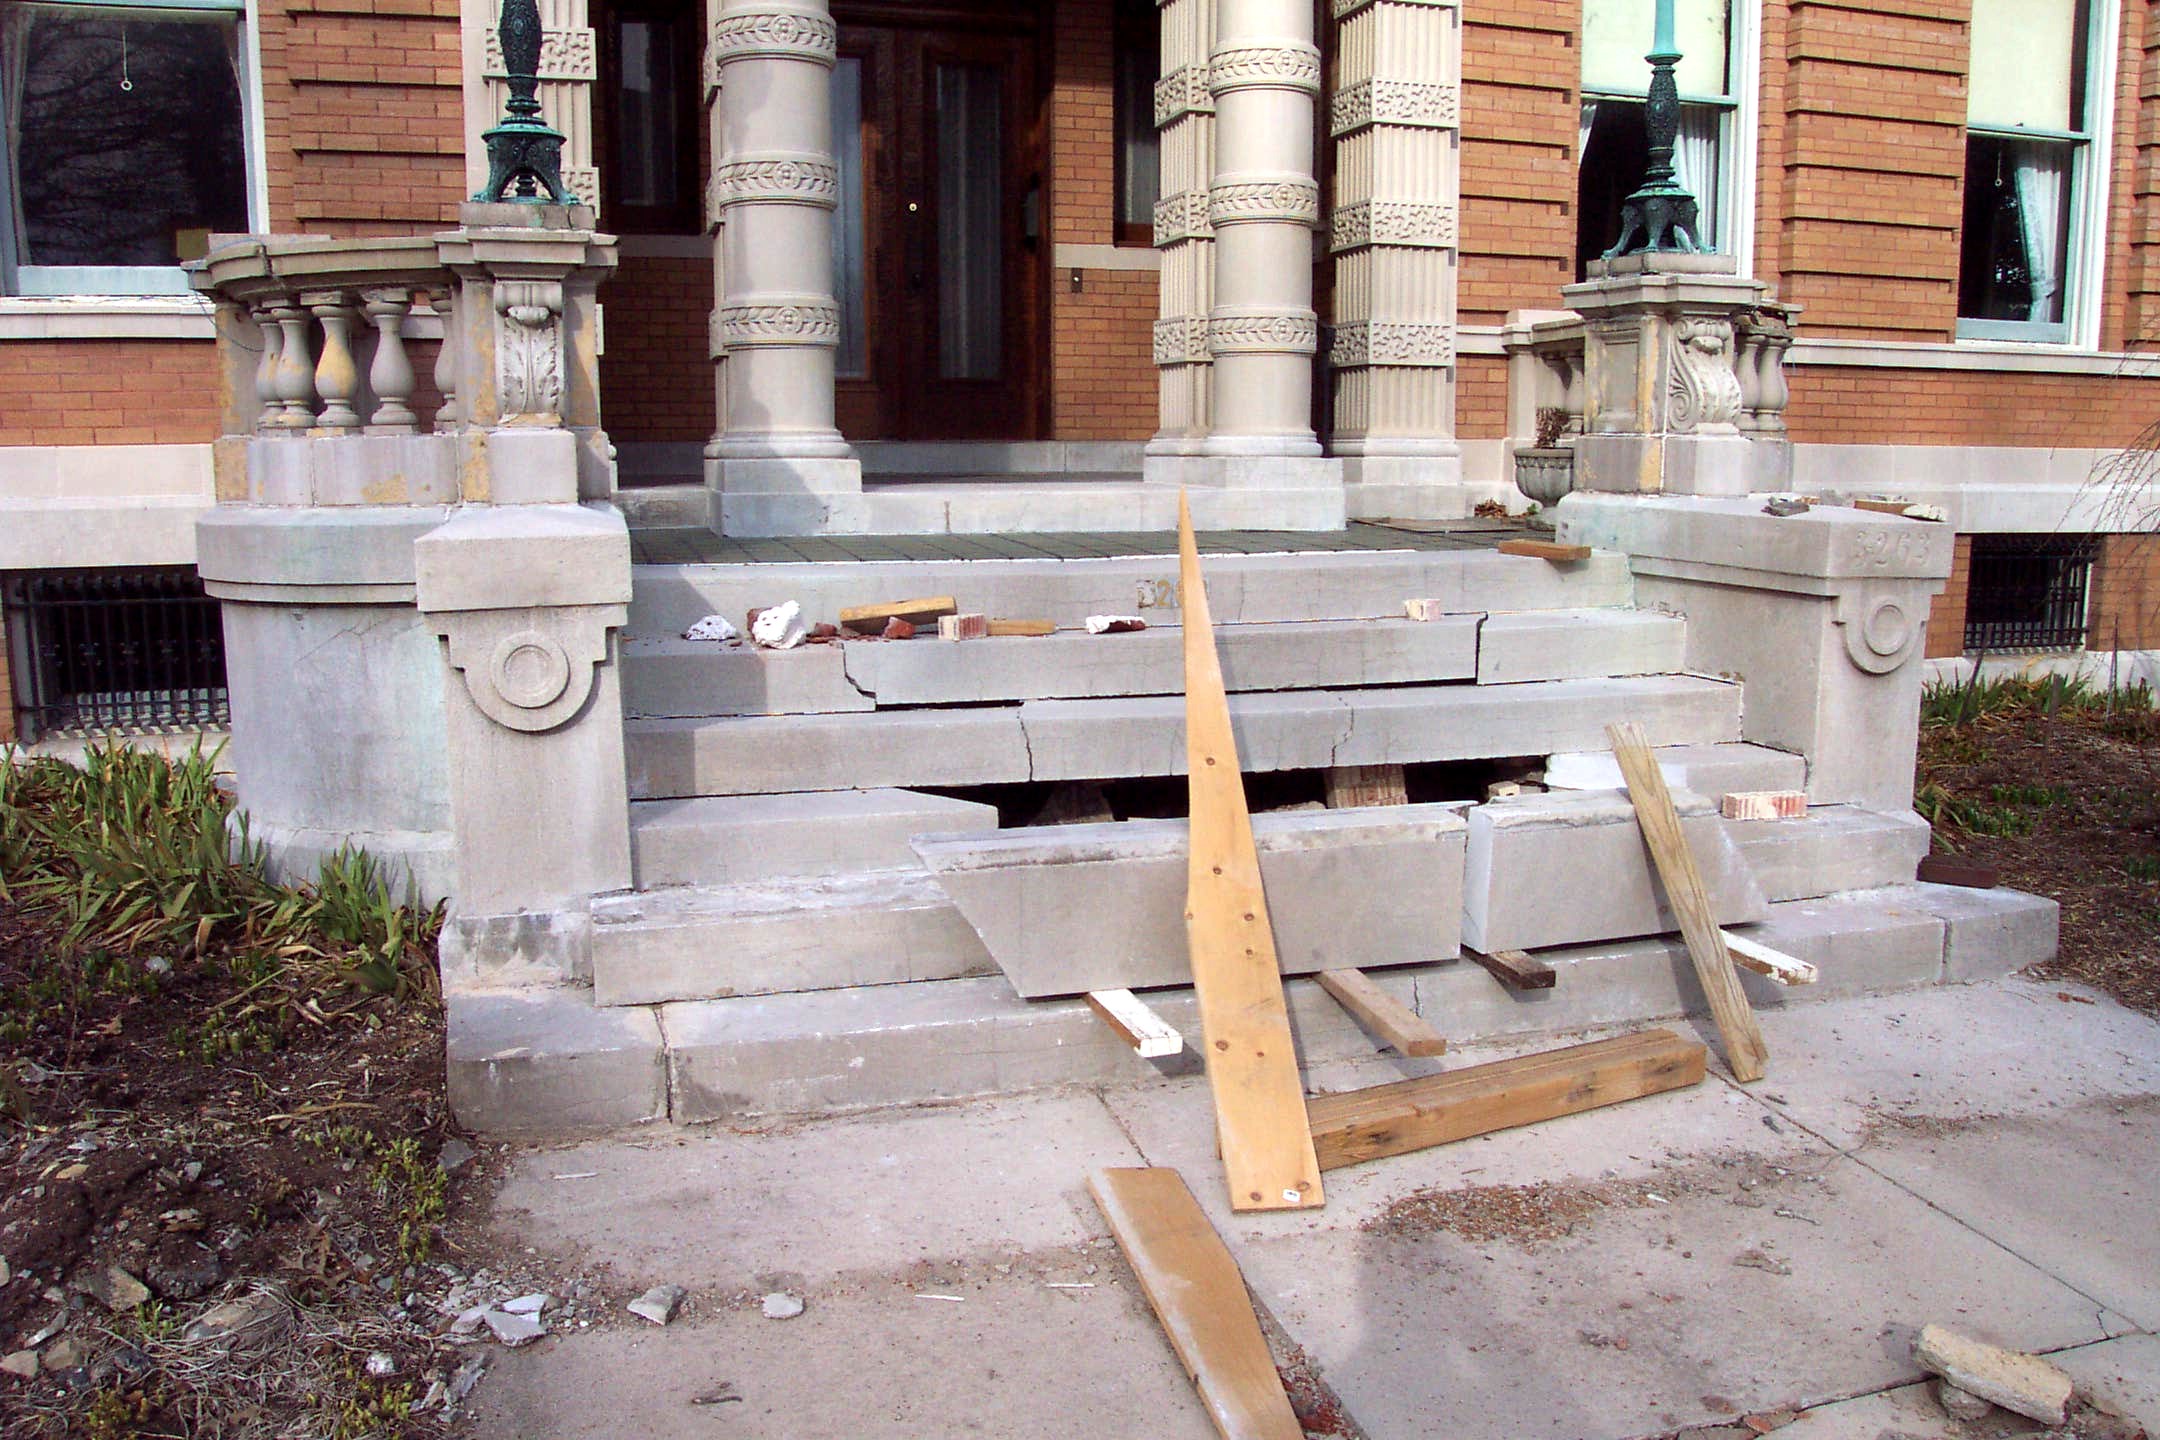 Before: This is the way another contractor left this project! The Carthage Limestone steps and terra cotta balustrade are in need of repair.